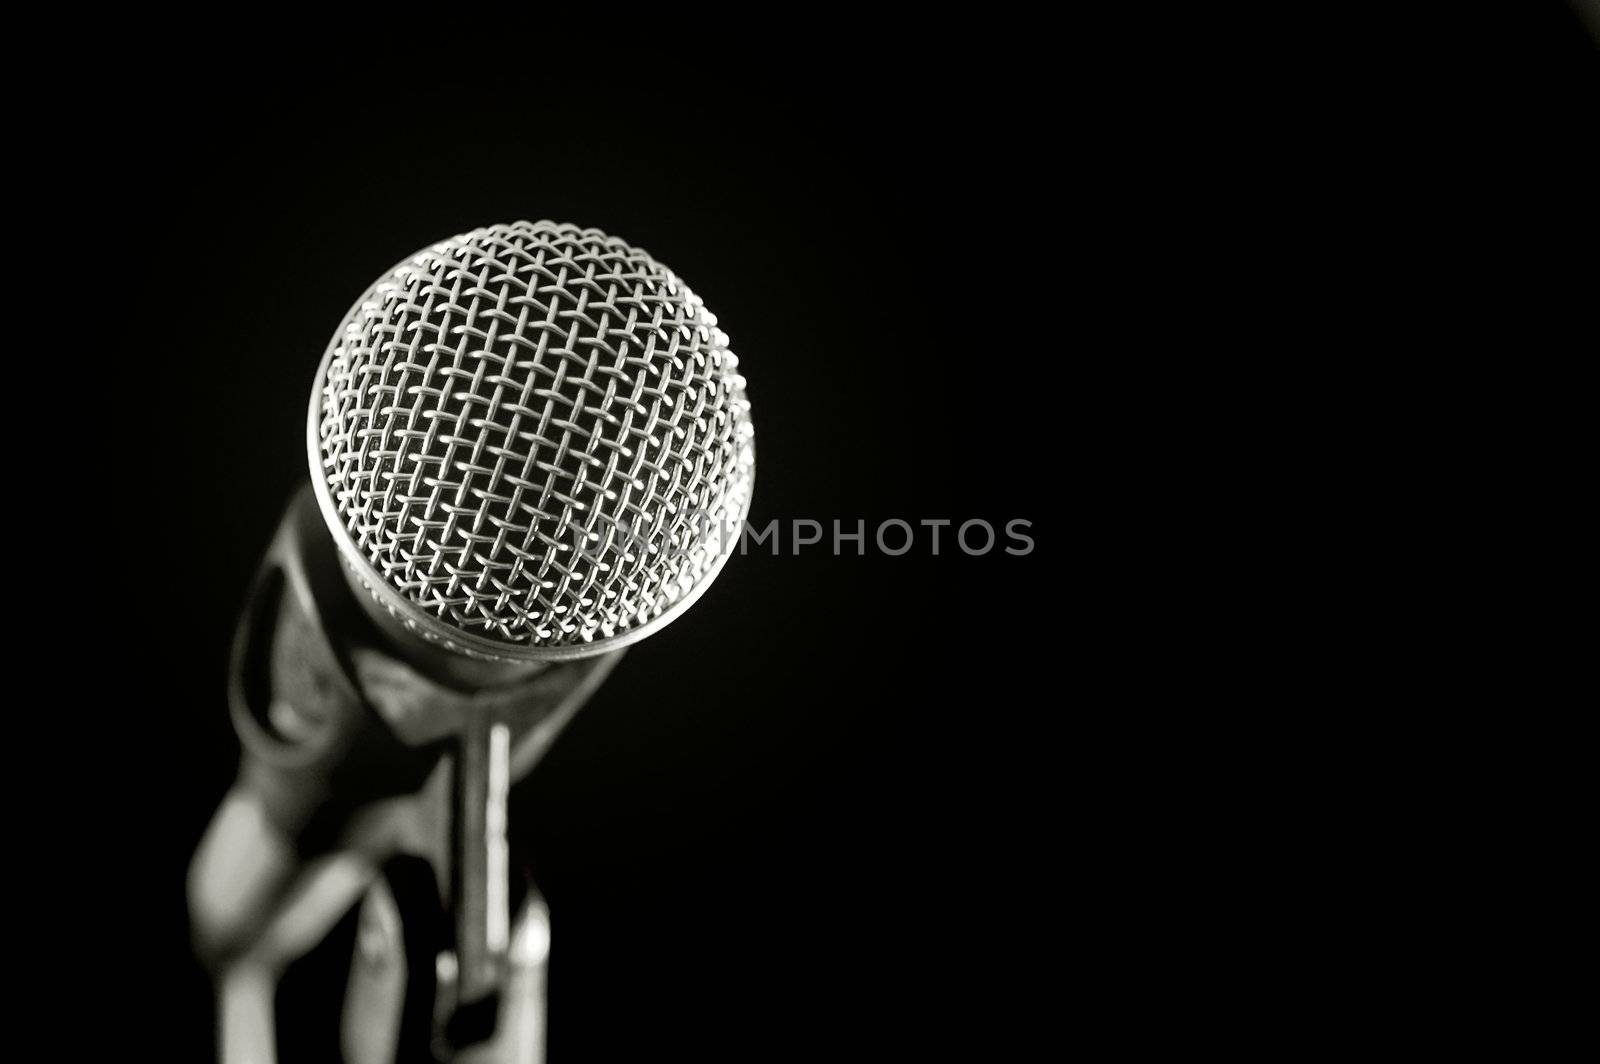 vocal microphone isolated on black